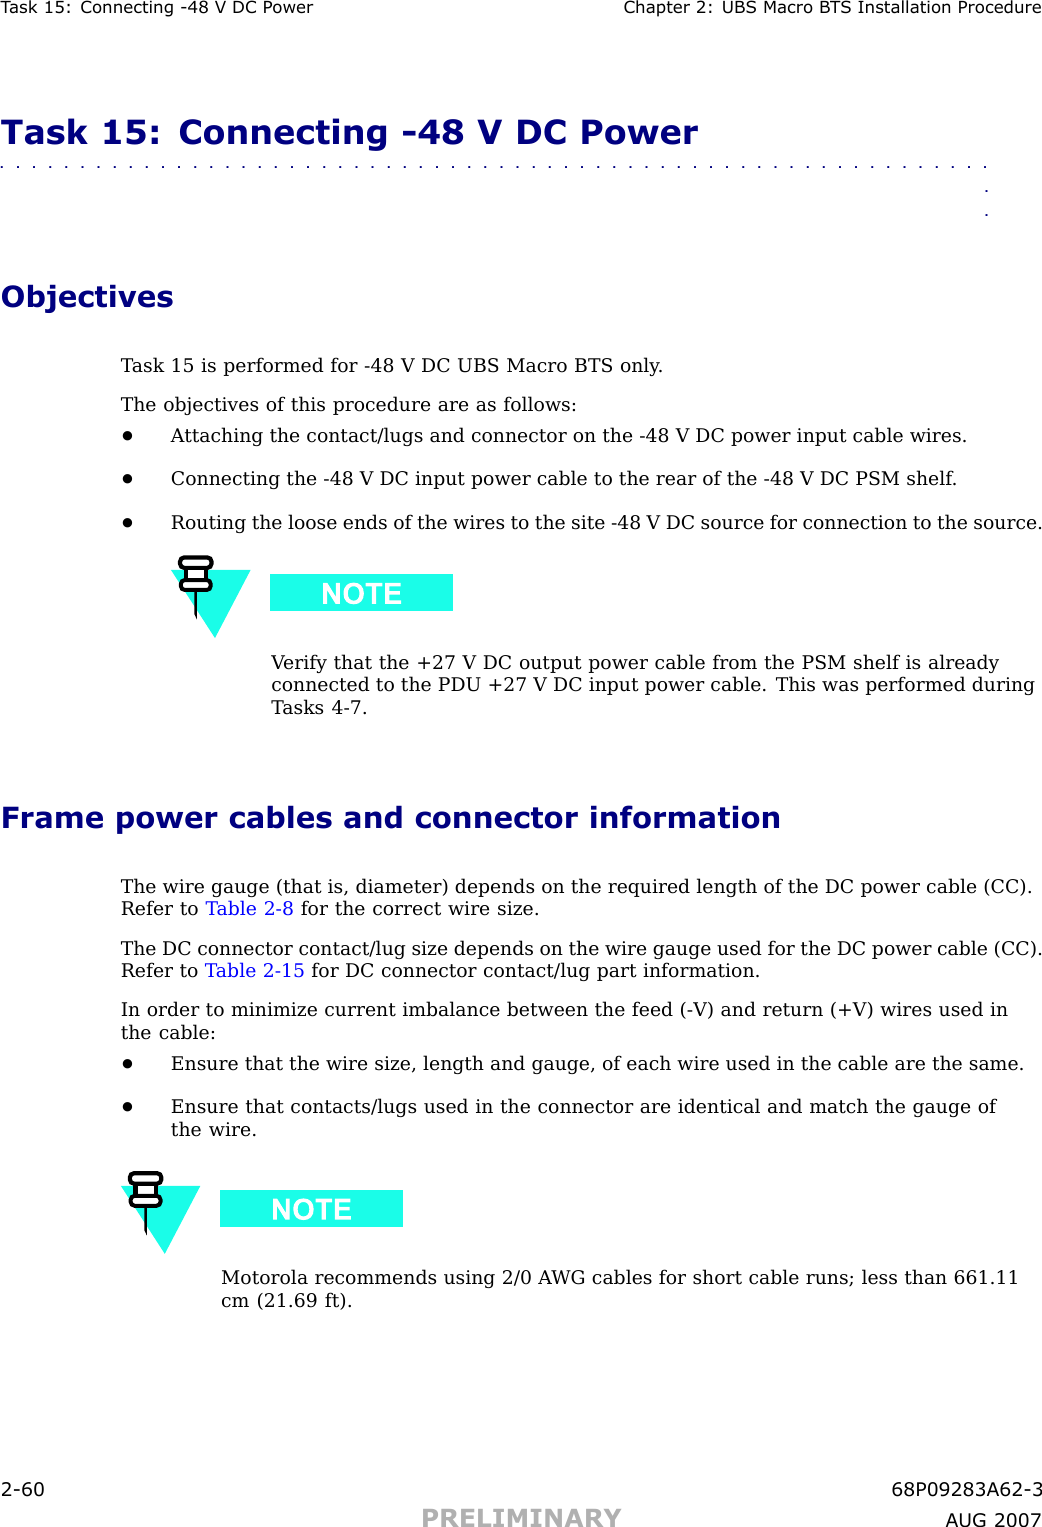 T ask 15: Connecting -48 V DC P ower Chapter 2: UBS Macro B T S Installation ProcedureTask 15: Connecting -48 V DC Power■■■■■■■■■■■■■■■■■■■■■■■■■■■■■■■■■■■■■■■■■■■■■■■■■■■■■■■■■■■■■■■■ObjectivesT ask 15 is performed for -48 V DC UBS Macro BTS only .The objectives of this procedure are as follows:•A ttaching the contact/lugs and connector on the -48 V DC power input cable wires.•Connecting the -48 V DC input power cable to the rear of the -48 V DC PSM shelf .•Routing the loose ends of the wires to the site -48 V DC source for connection to the source.V erify that the +27 V DC output power cable from the PSM shelf is alreadyconnected to the PDU +27 V DC input power cable. This was performed duringT asks 4 -7.Frame power cables and connector informationThe wire gauge (that is, diameter) depends on the required length of the DC power cable (CC).Refer to T able 2 -8 for the correct wire size.The DC connector contact/lug size depends on the wire gauge used for the DC power cable (CC).Refer to T able 2 -15 for DC connector contact/lug part information.In order to minimize current imbalance between the feed ( -V) and return (+V) wires used inthe cable:•Ensure that the wire size, length and gauge, of each wire used in the cable are the same.•Ensure that contacts/lugs used in the connector are identical and match the gauge ofthe wire.Motorola recommends using 2/0 A WG cables for short cable runs; less than 661.11cm (21.69 ft).2 -60 68P09283A62 -3PRELIMINARY A UG 2007